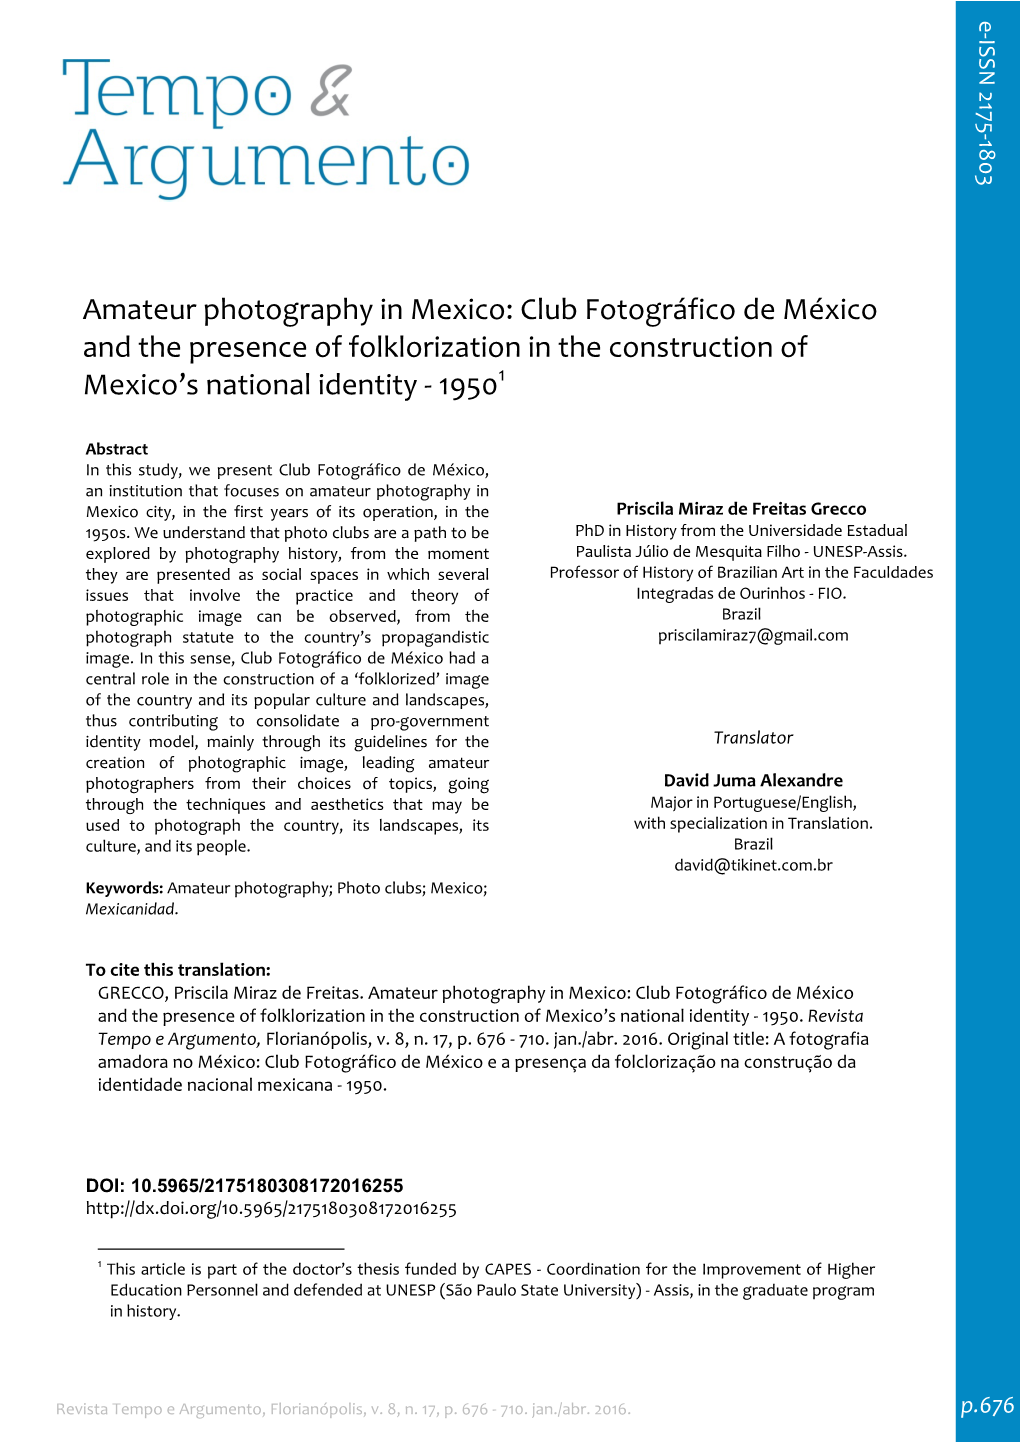 Amateur Photography in Mexico: Club Fotográfico De México and the Presence of Folklorization in the Construction of Mexico’S National Identity ‐ 19501